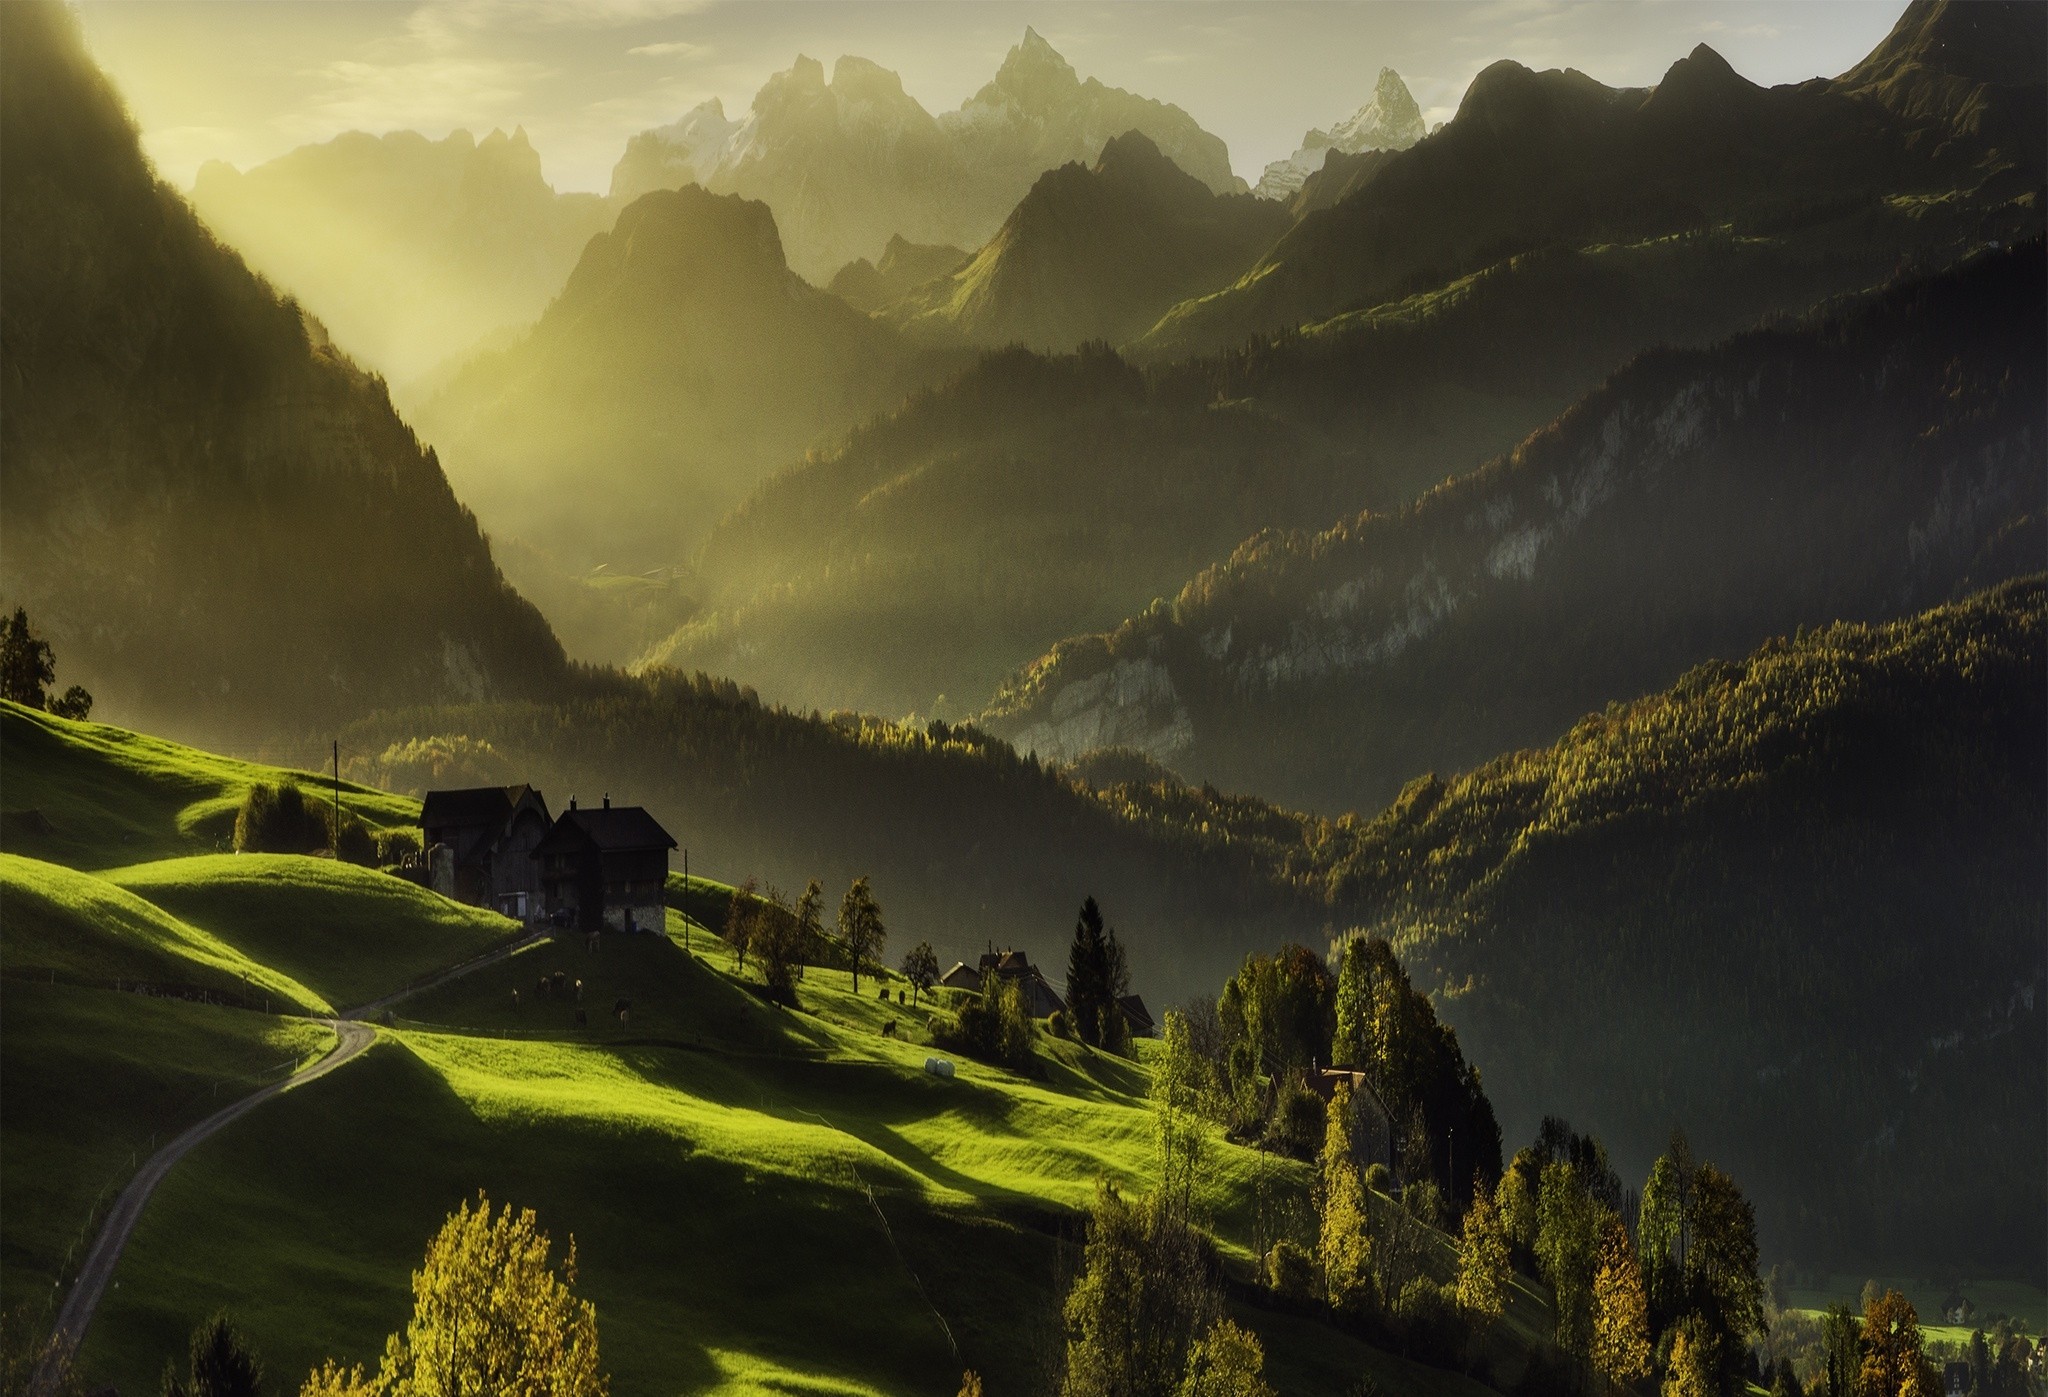 General 2048x1397 Switzerland mountains mist forest road grass green fall cabin Alps landscape nature valley